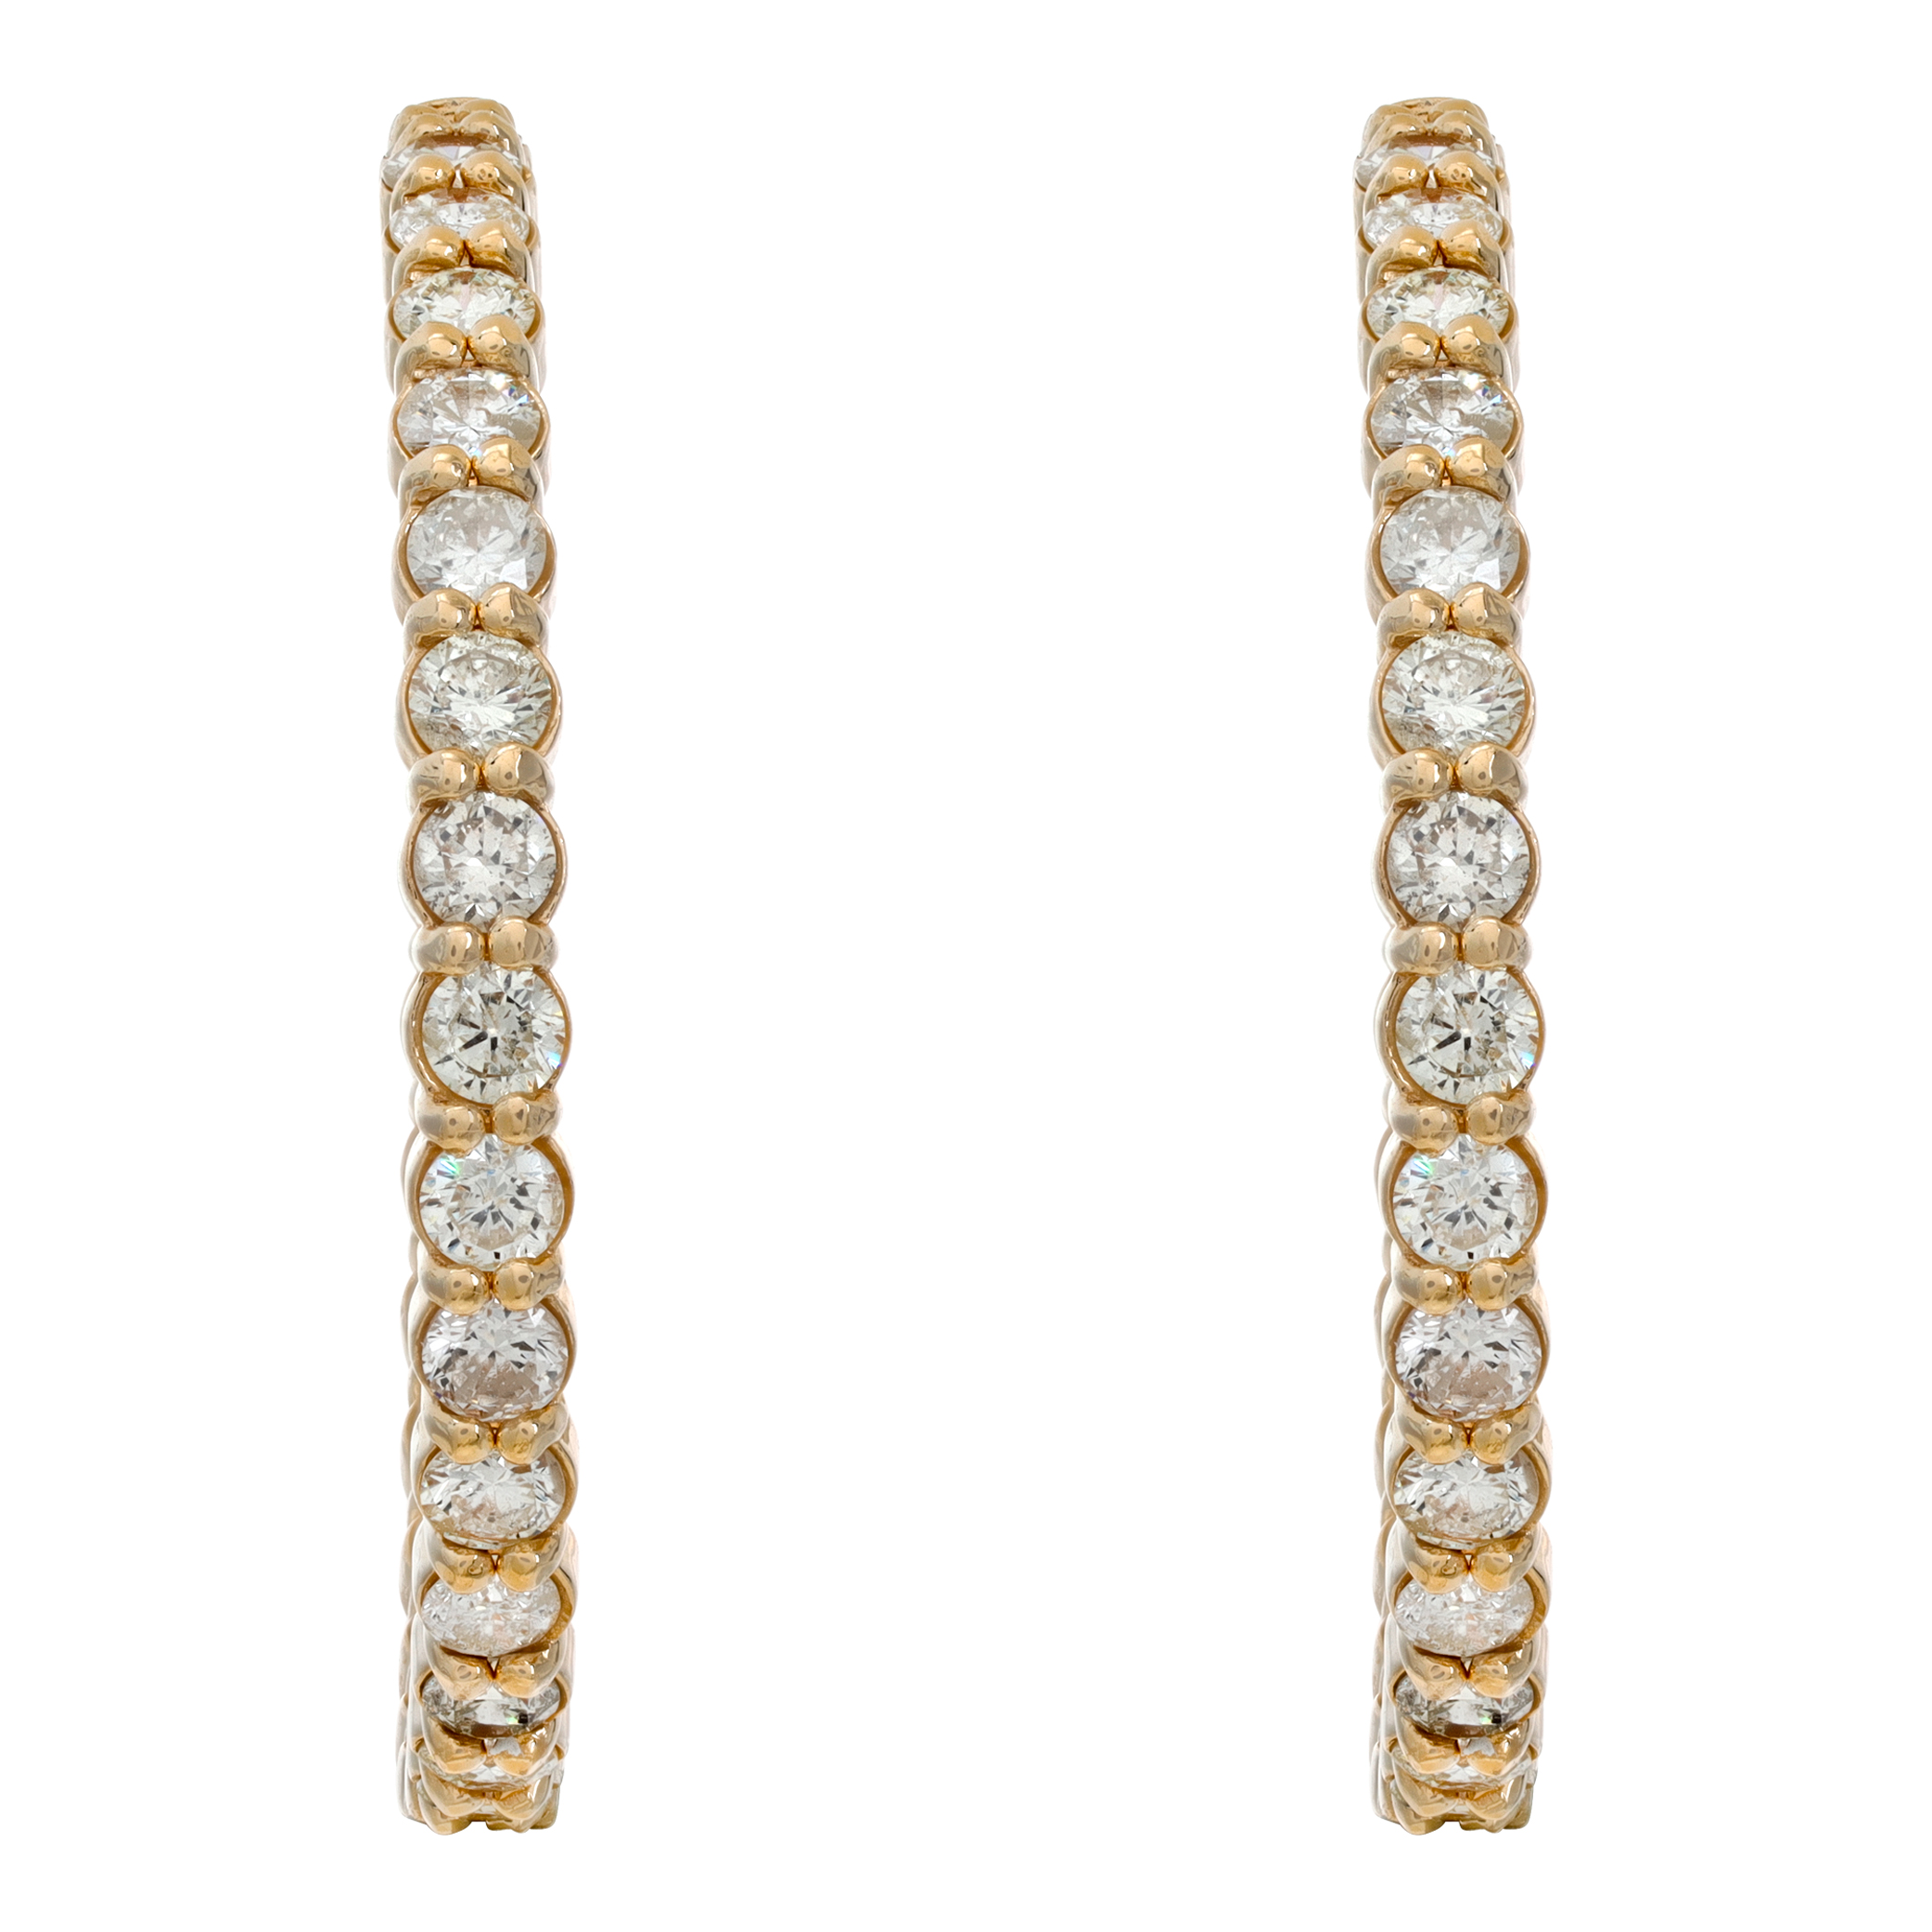 Diamond hoop earrings with approximately 7 carats in diamonds